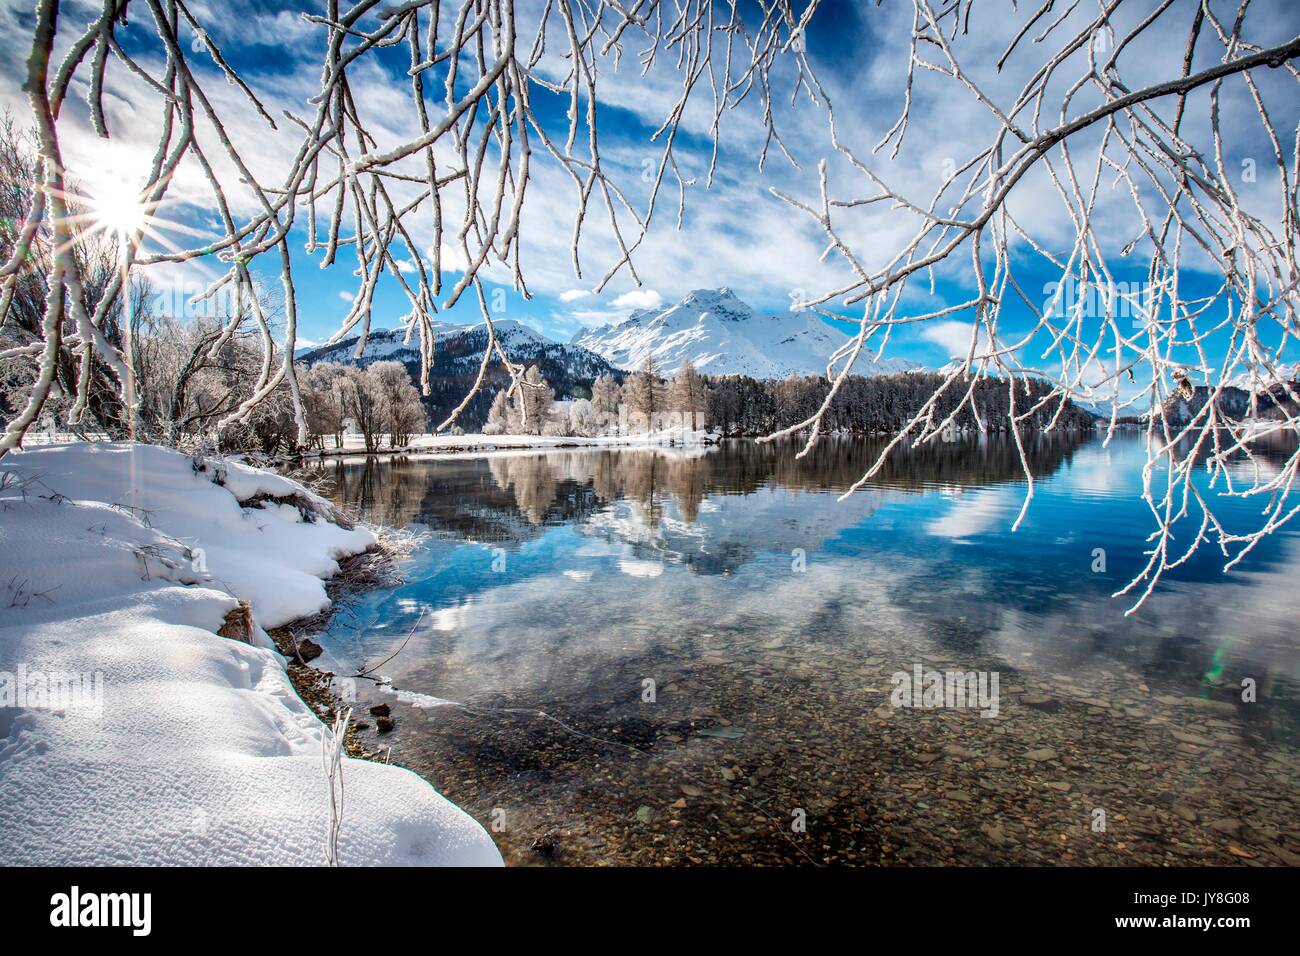 Hoarfrost covering the branches of the trees on the banks of Lake Sils, Engadine, Switzerland Stock Photo